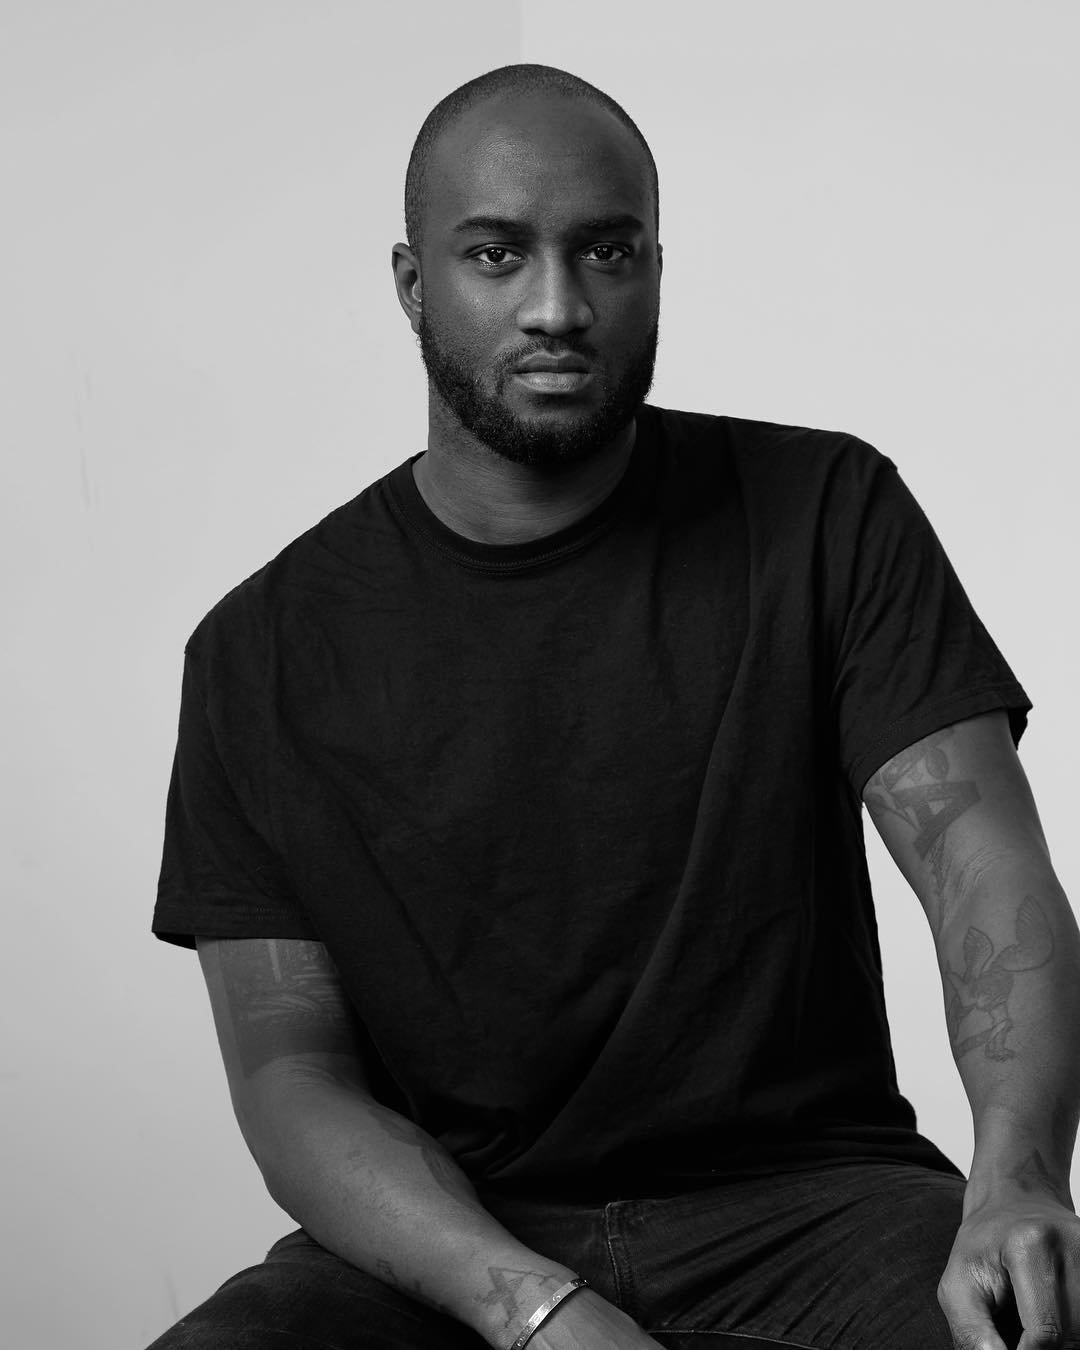 Neiman Marcus Group CEO Geoffroy van Raemdonck Honored with the Late Virgil  Abloh at the Fashion Scholarship Fund FSF Live Event Supporting the Next  Generation of Industry Leaders